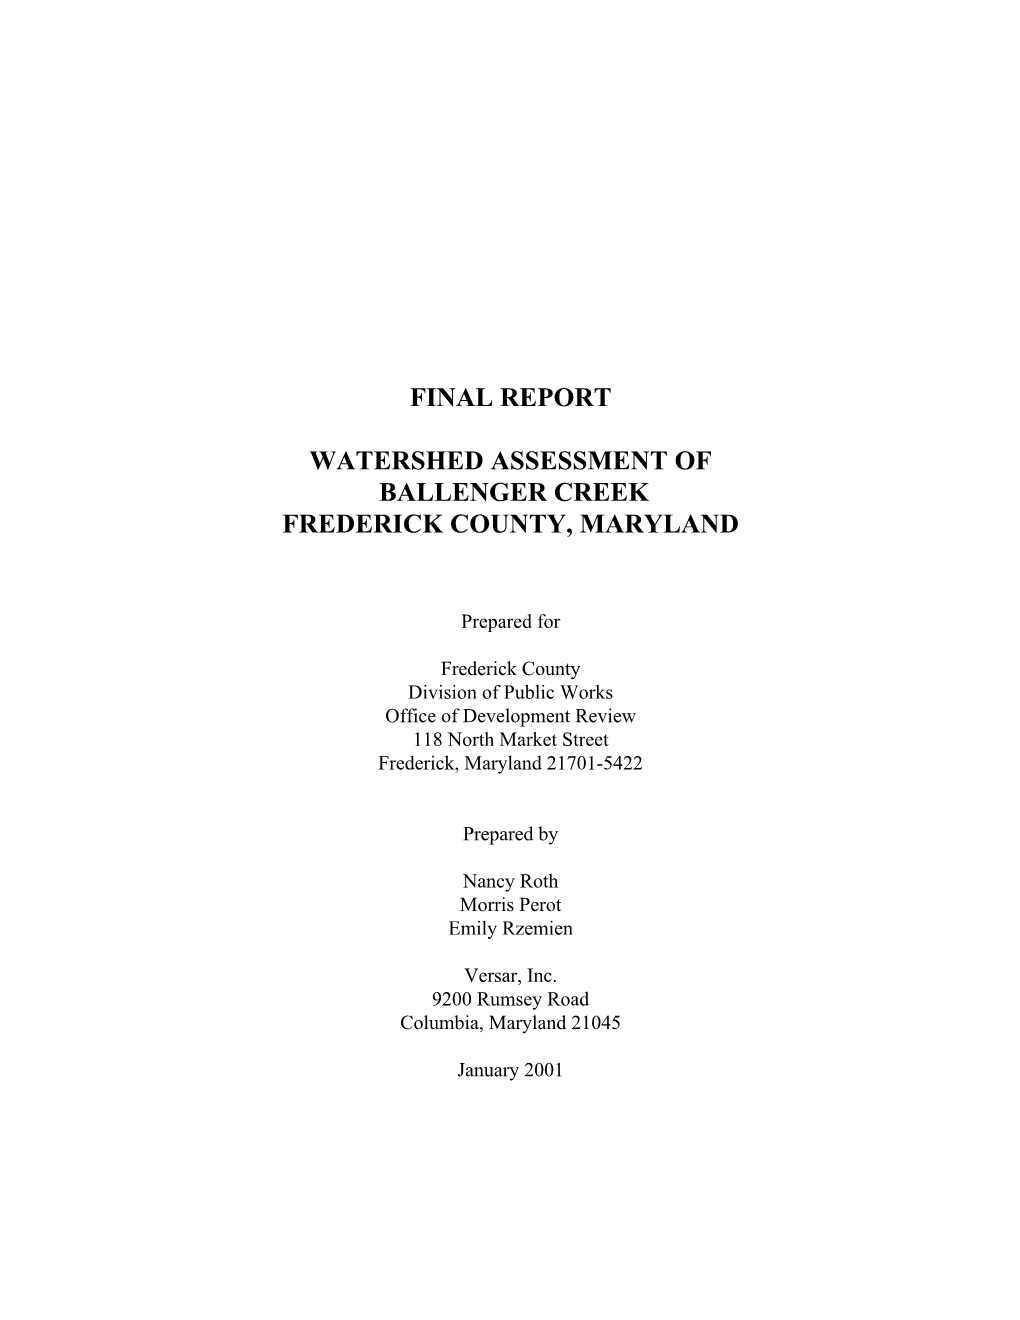 Final Report Watershed Assessment of Ballenger Creek Frederick County